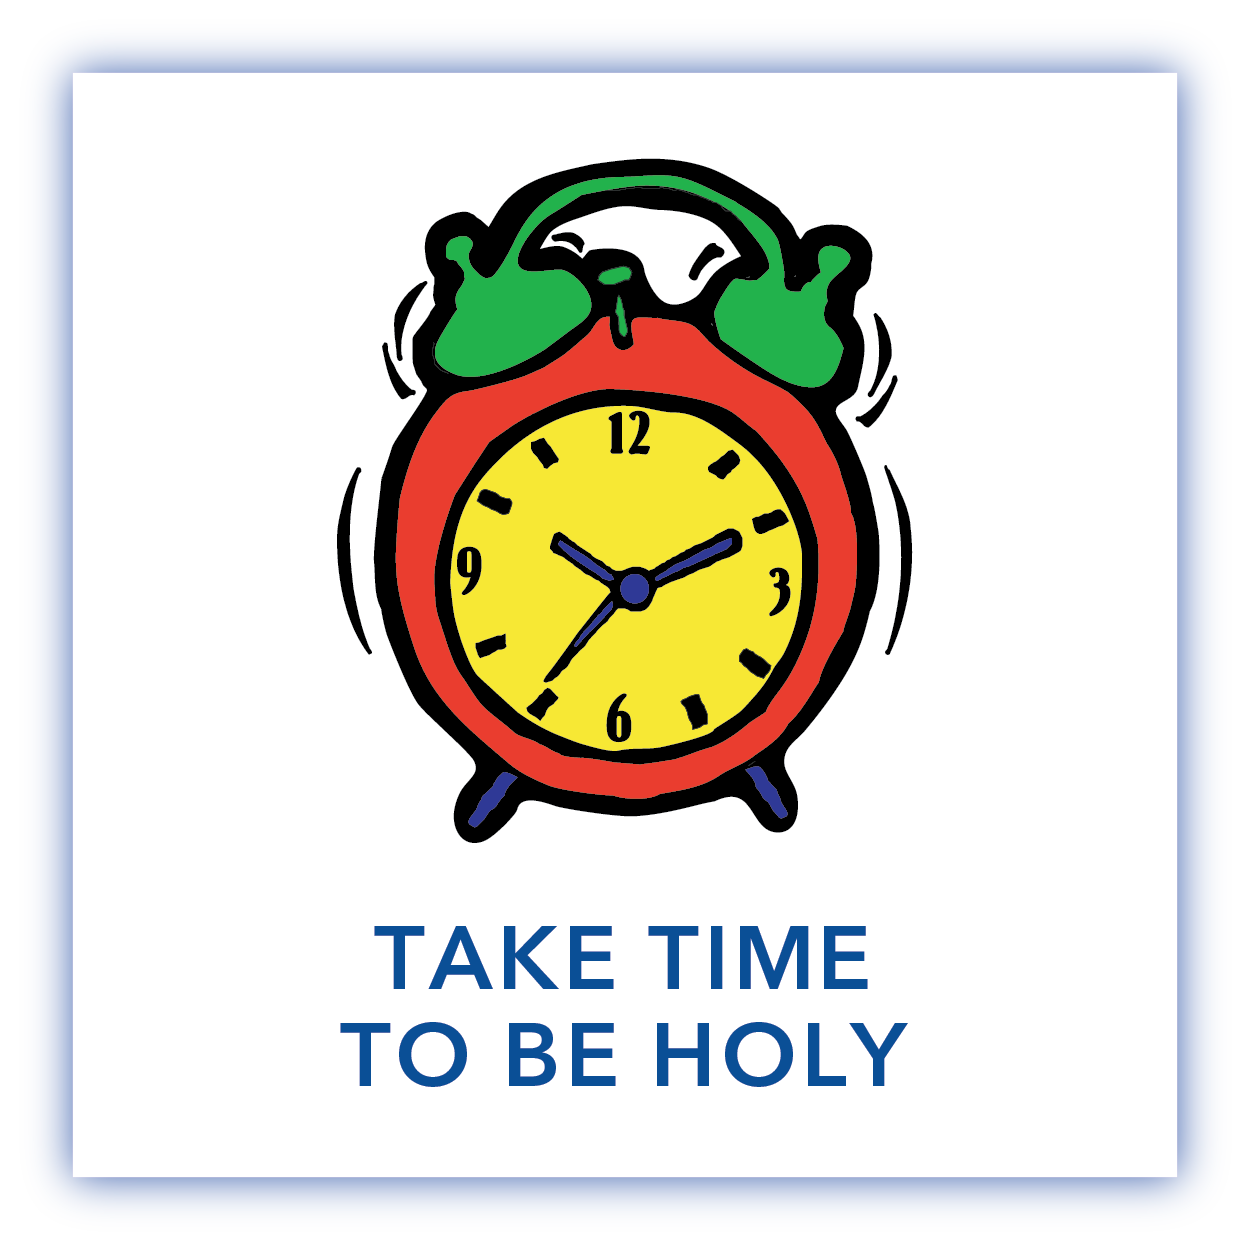 Shaping Hearts Year 1 Quarter 3 - Take Time to Be Holy